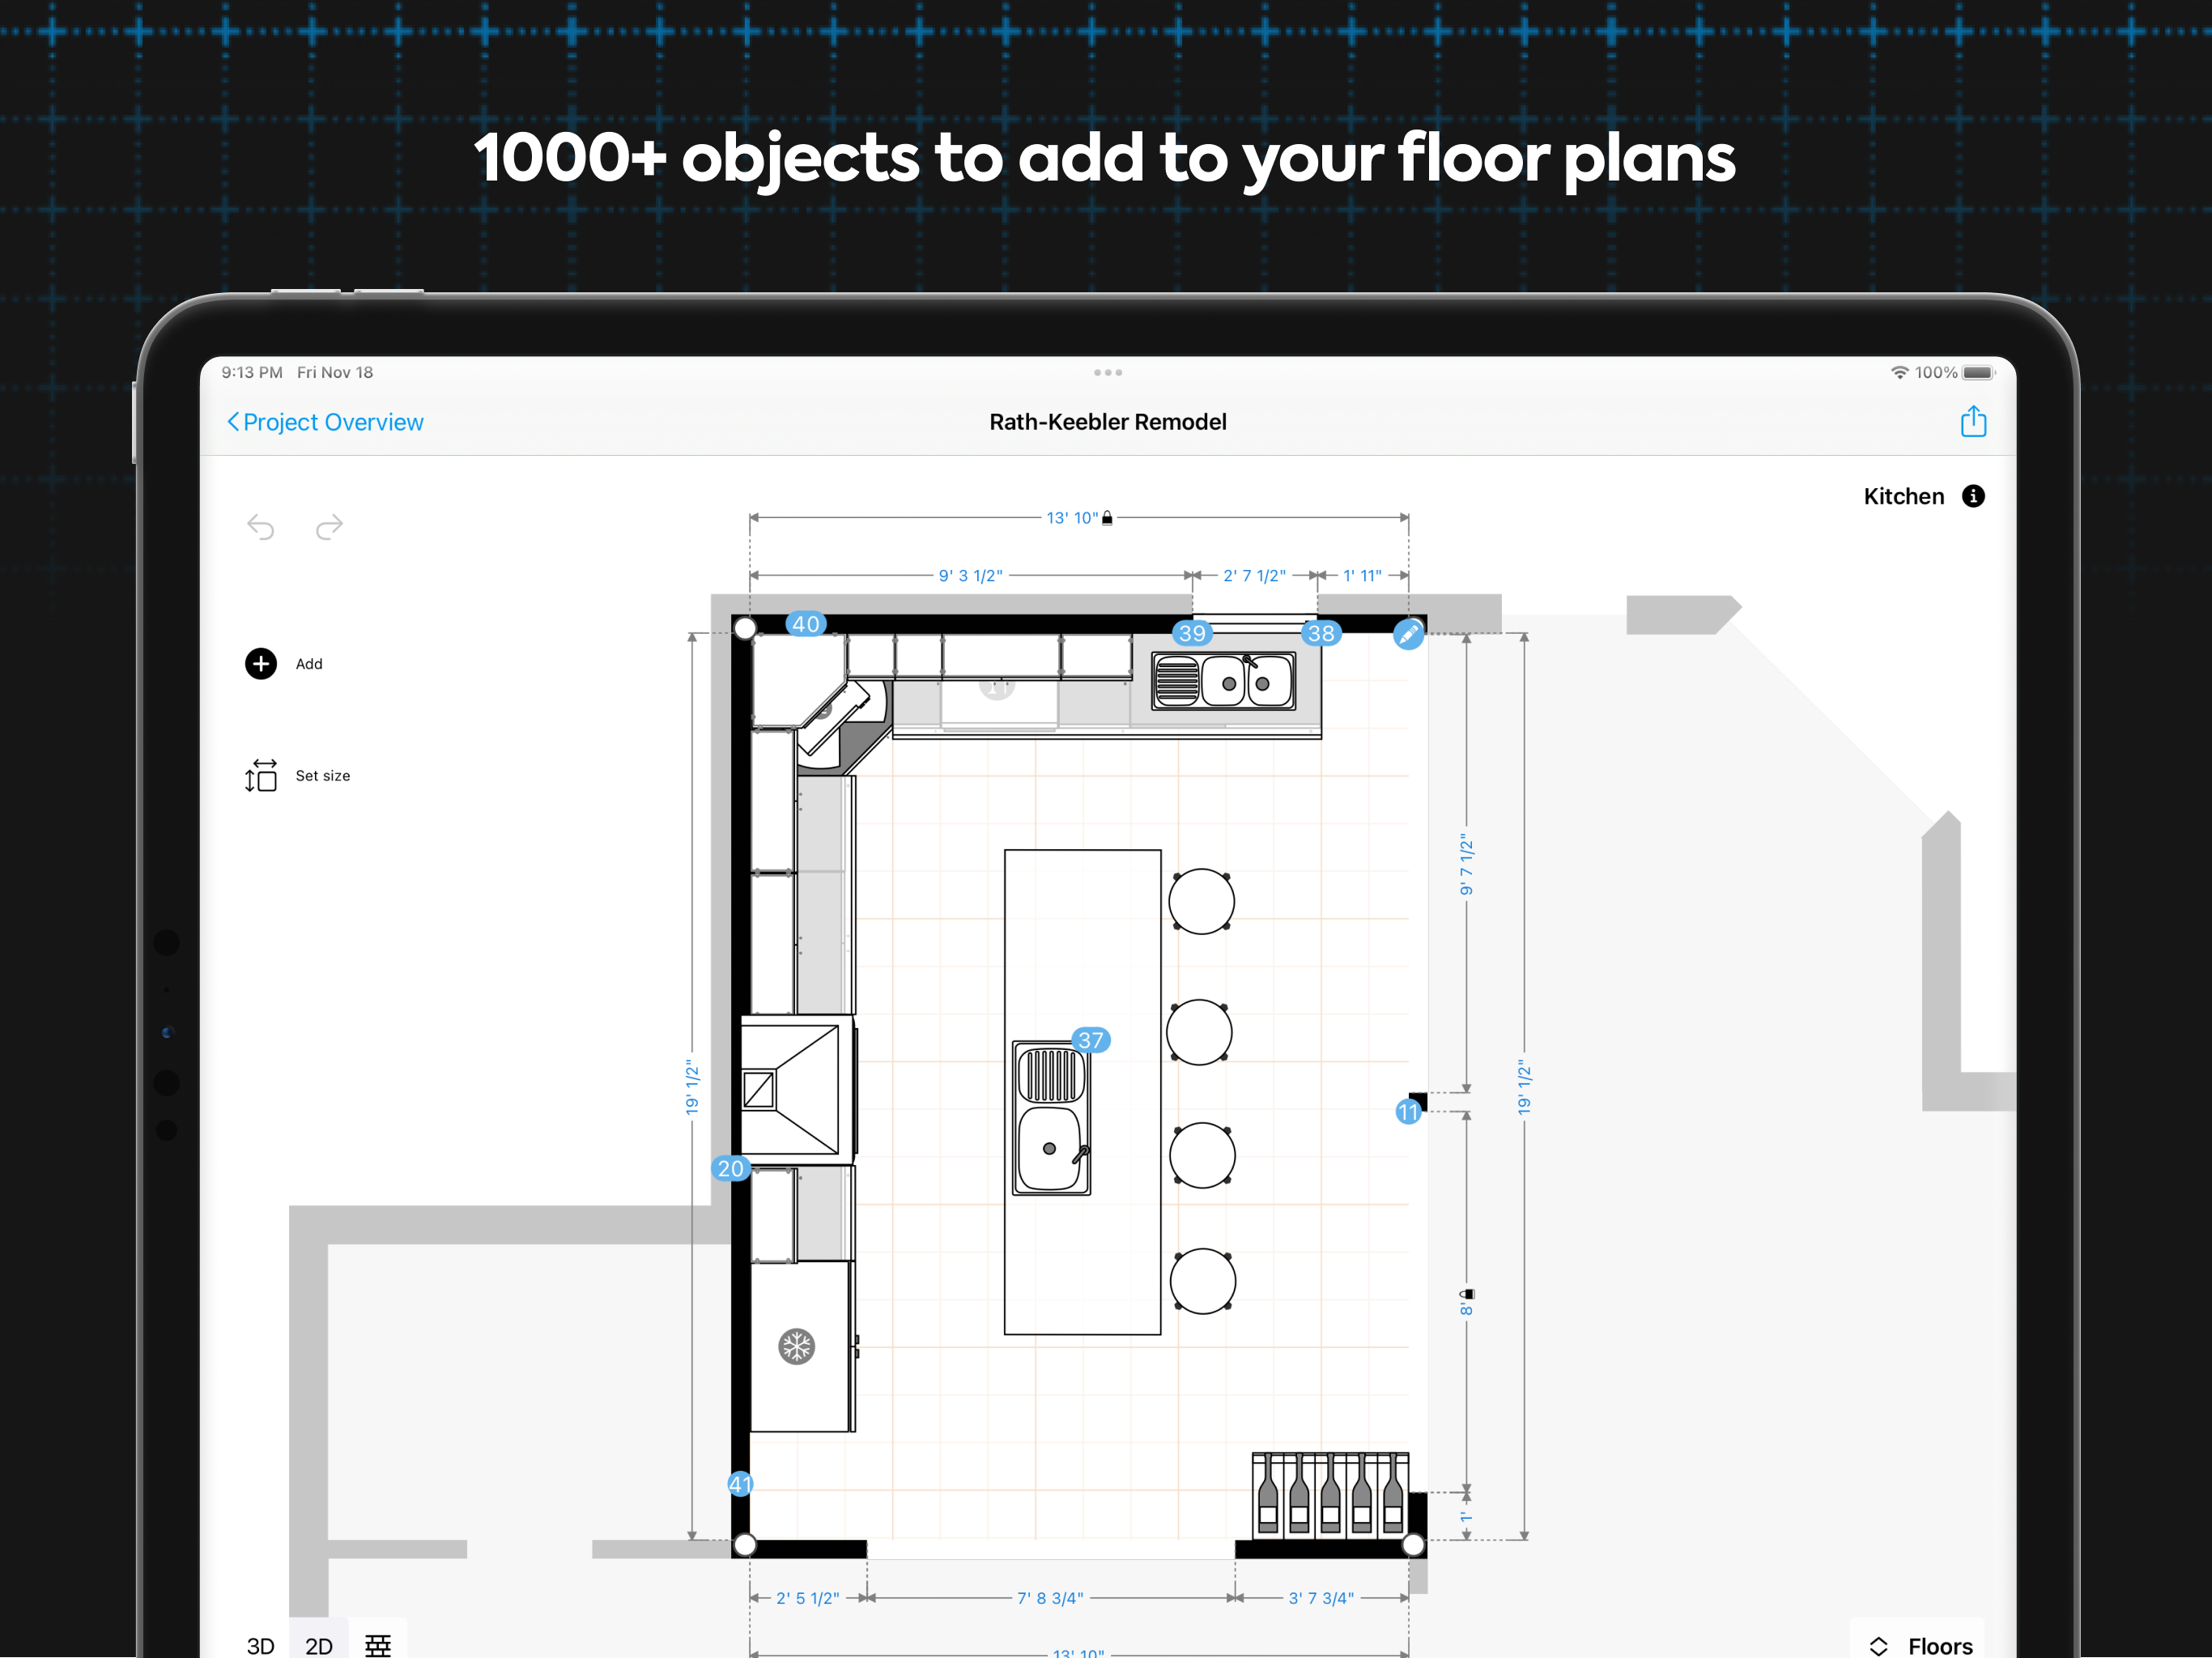 1000+ objects to add to your floor plans